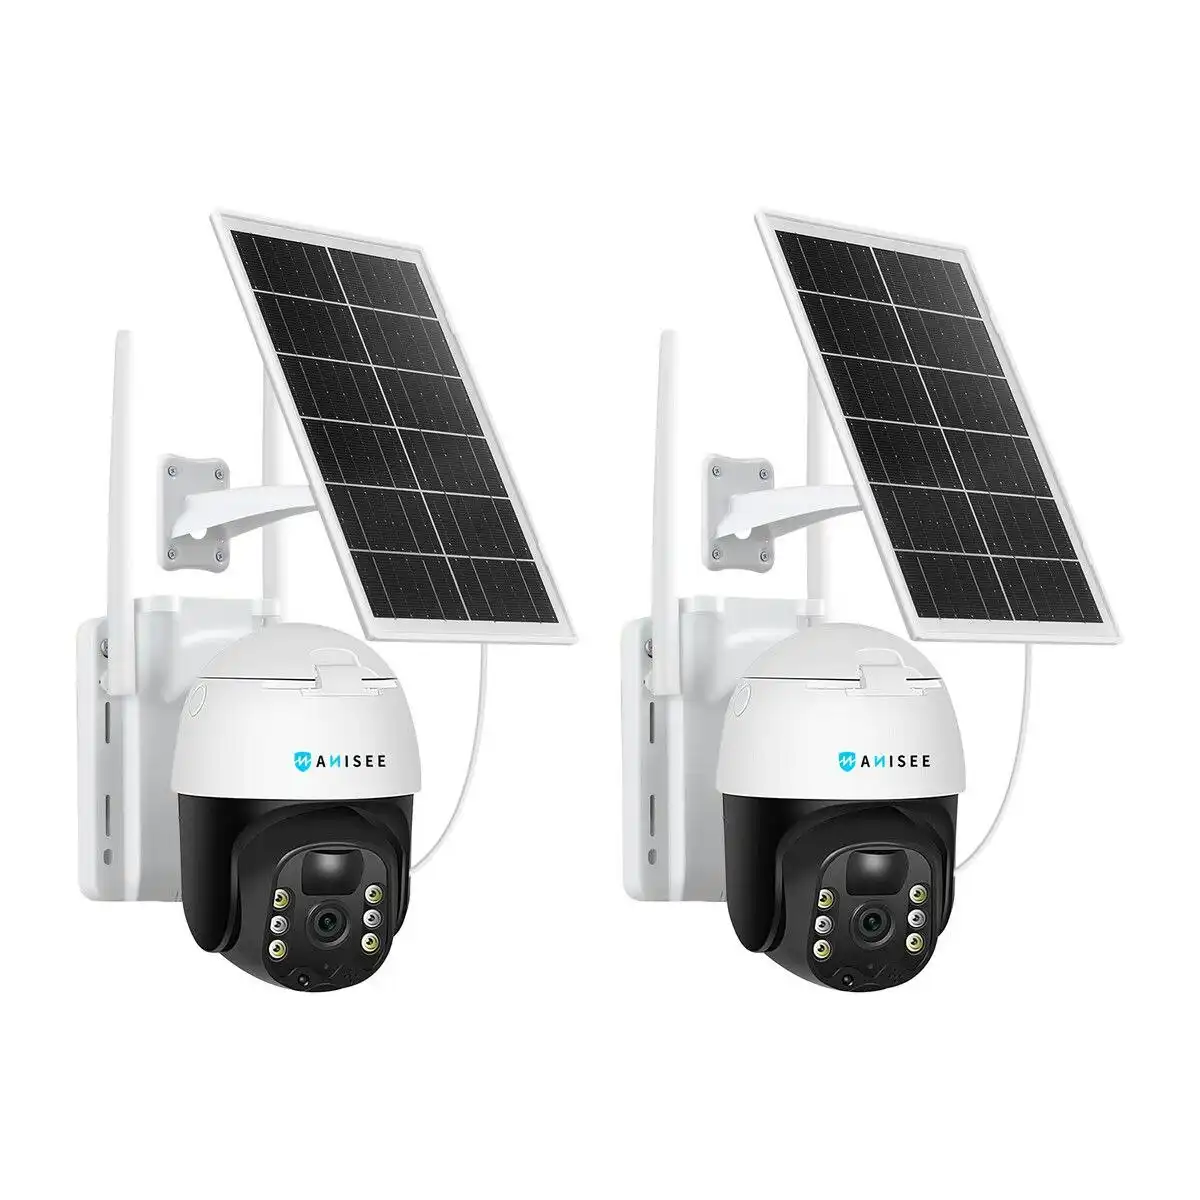 Anisee Solar Security Camerax2 Wireless Outdoor CCTV WiFi Home Surveillance System 4MP PTZ Remote 2 Way Audio Color Night Vision